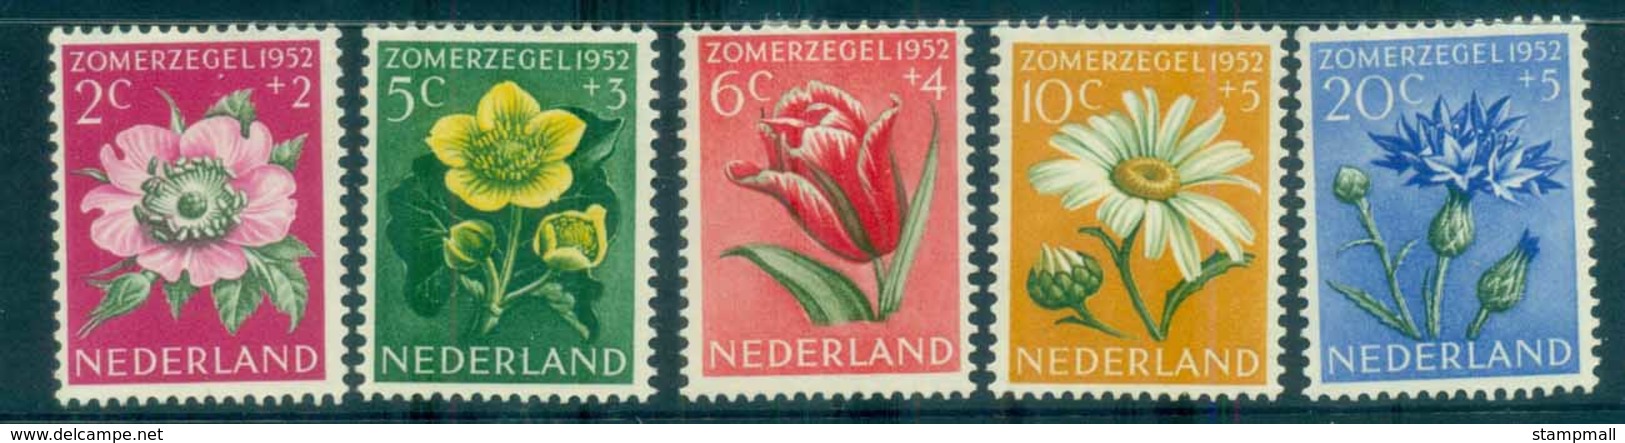 Netherlands 1952 Charity, Cultural, Medical & Social Purposes MH Lot76495 - Unclassified